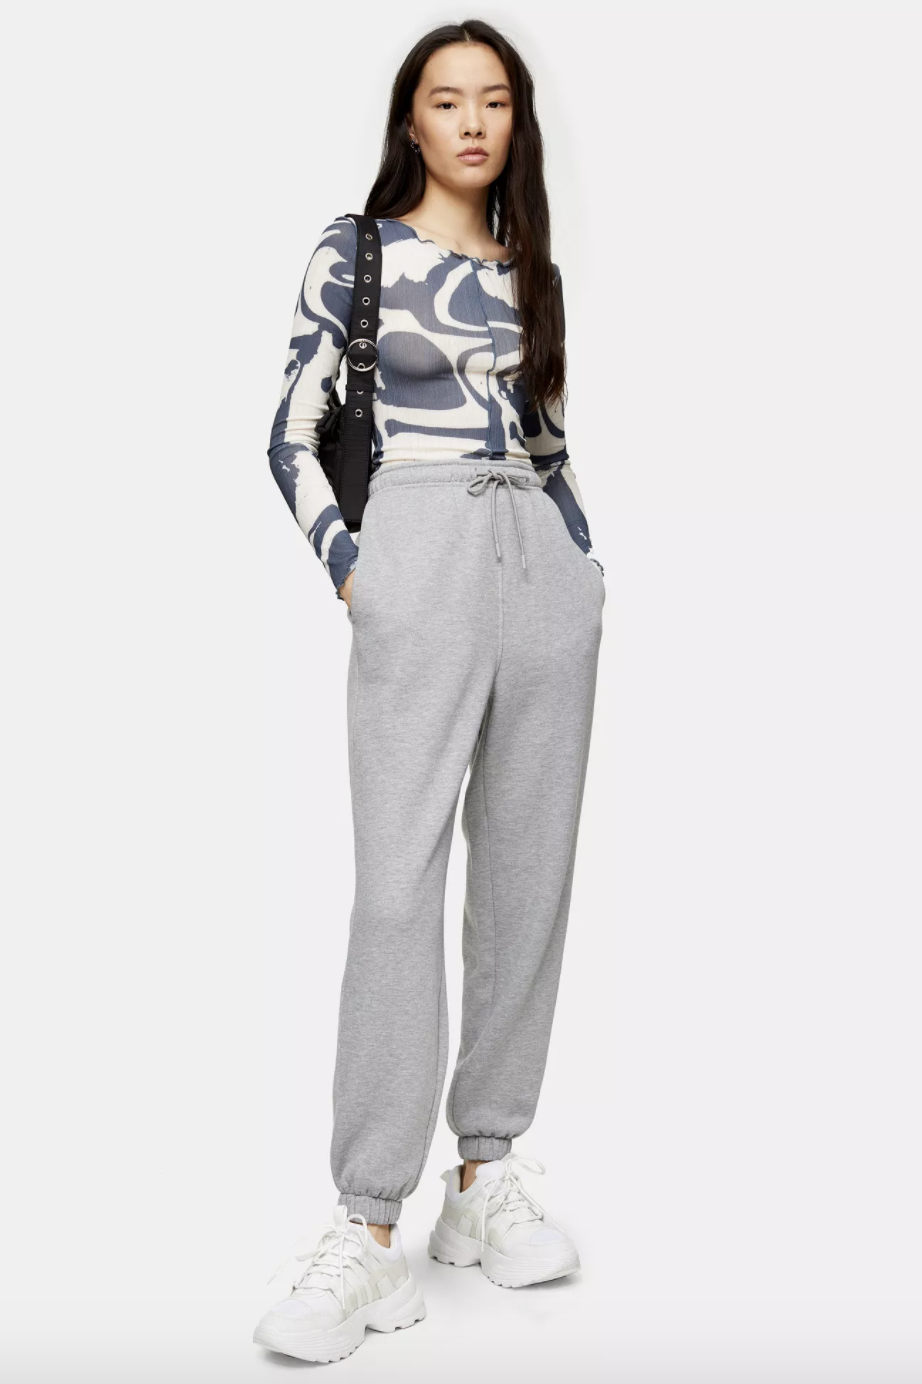 18 Pairs of Sweats to Add to Your Comfy ...